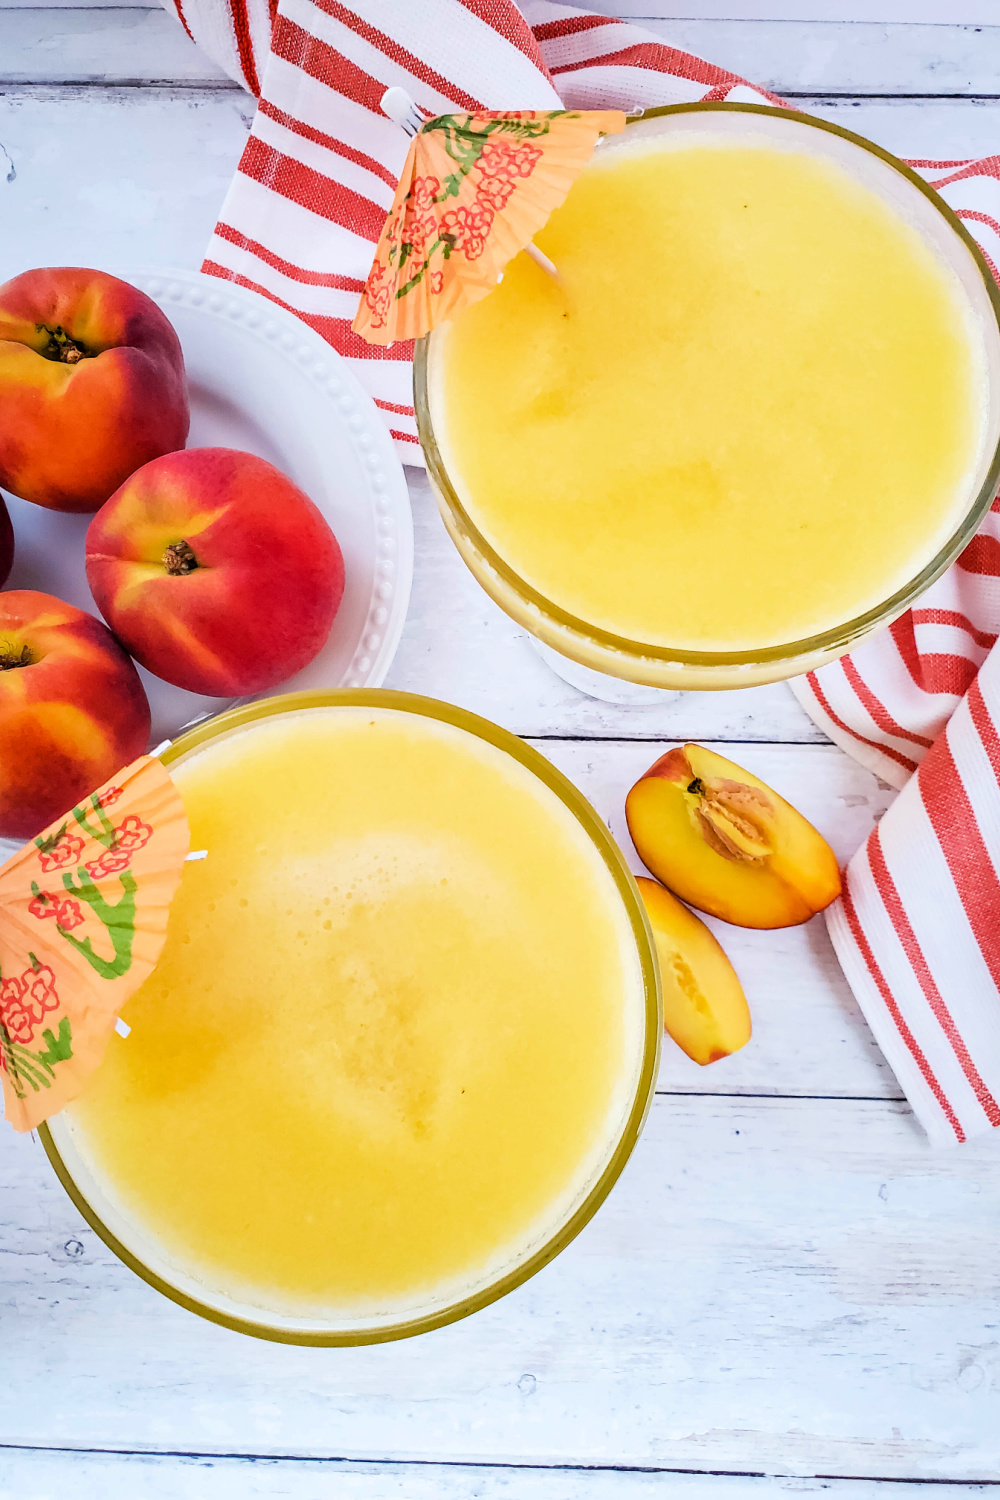 These two frozen peach margaritas are garnished with fun drink umbrellas. They are sitting on a white wood background with a stripped hand towel and sliced peaches. 